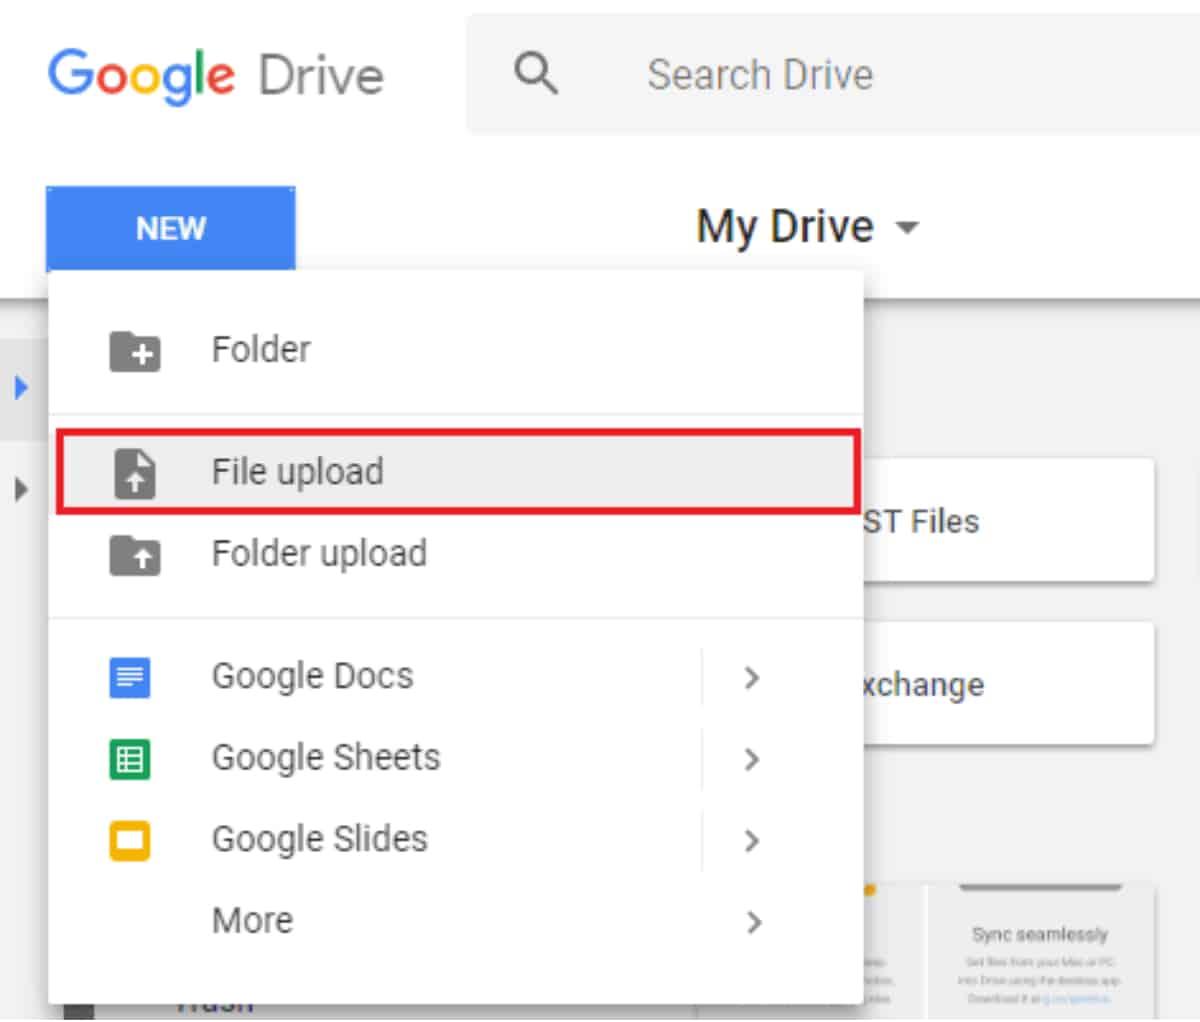 The Ultimate Guide On How To Use Google Drive For Business
